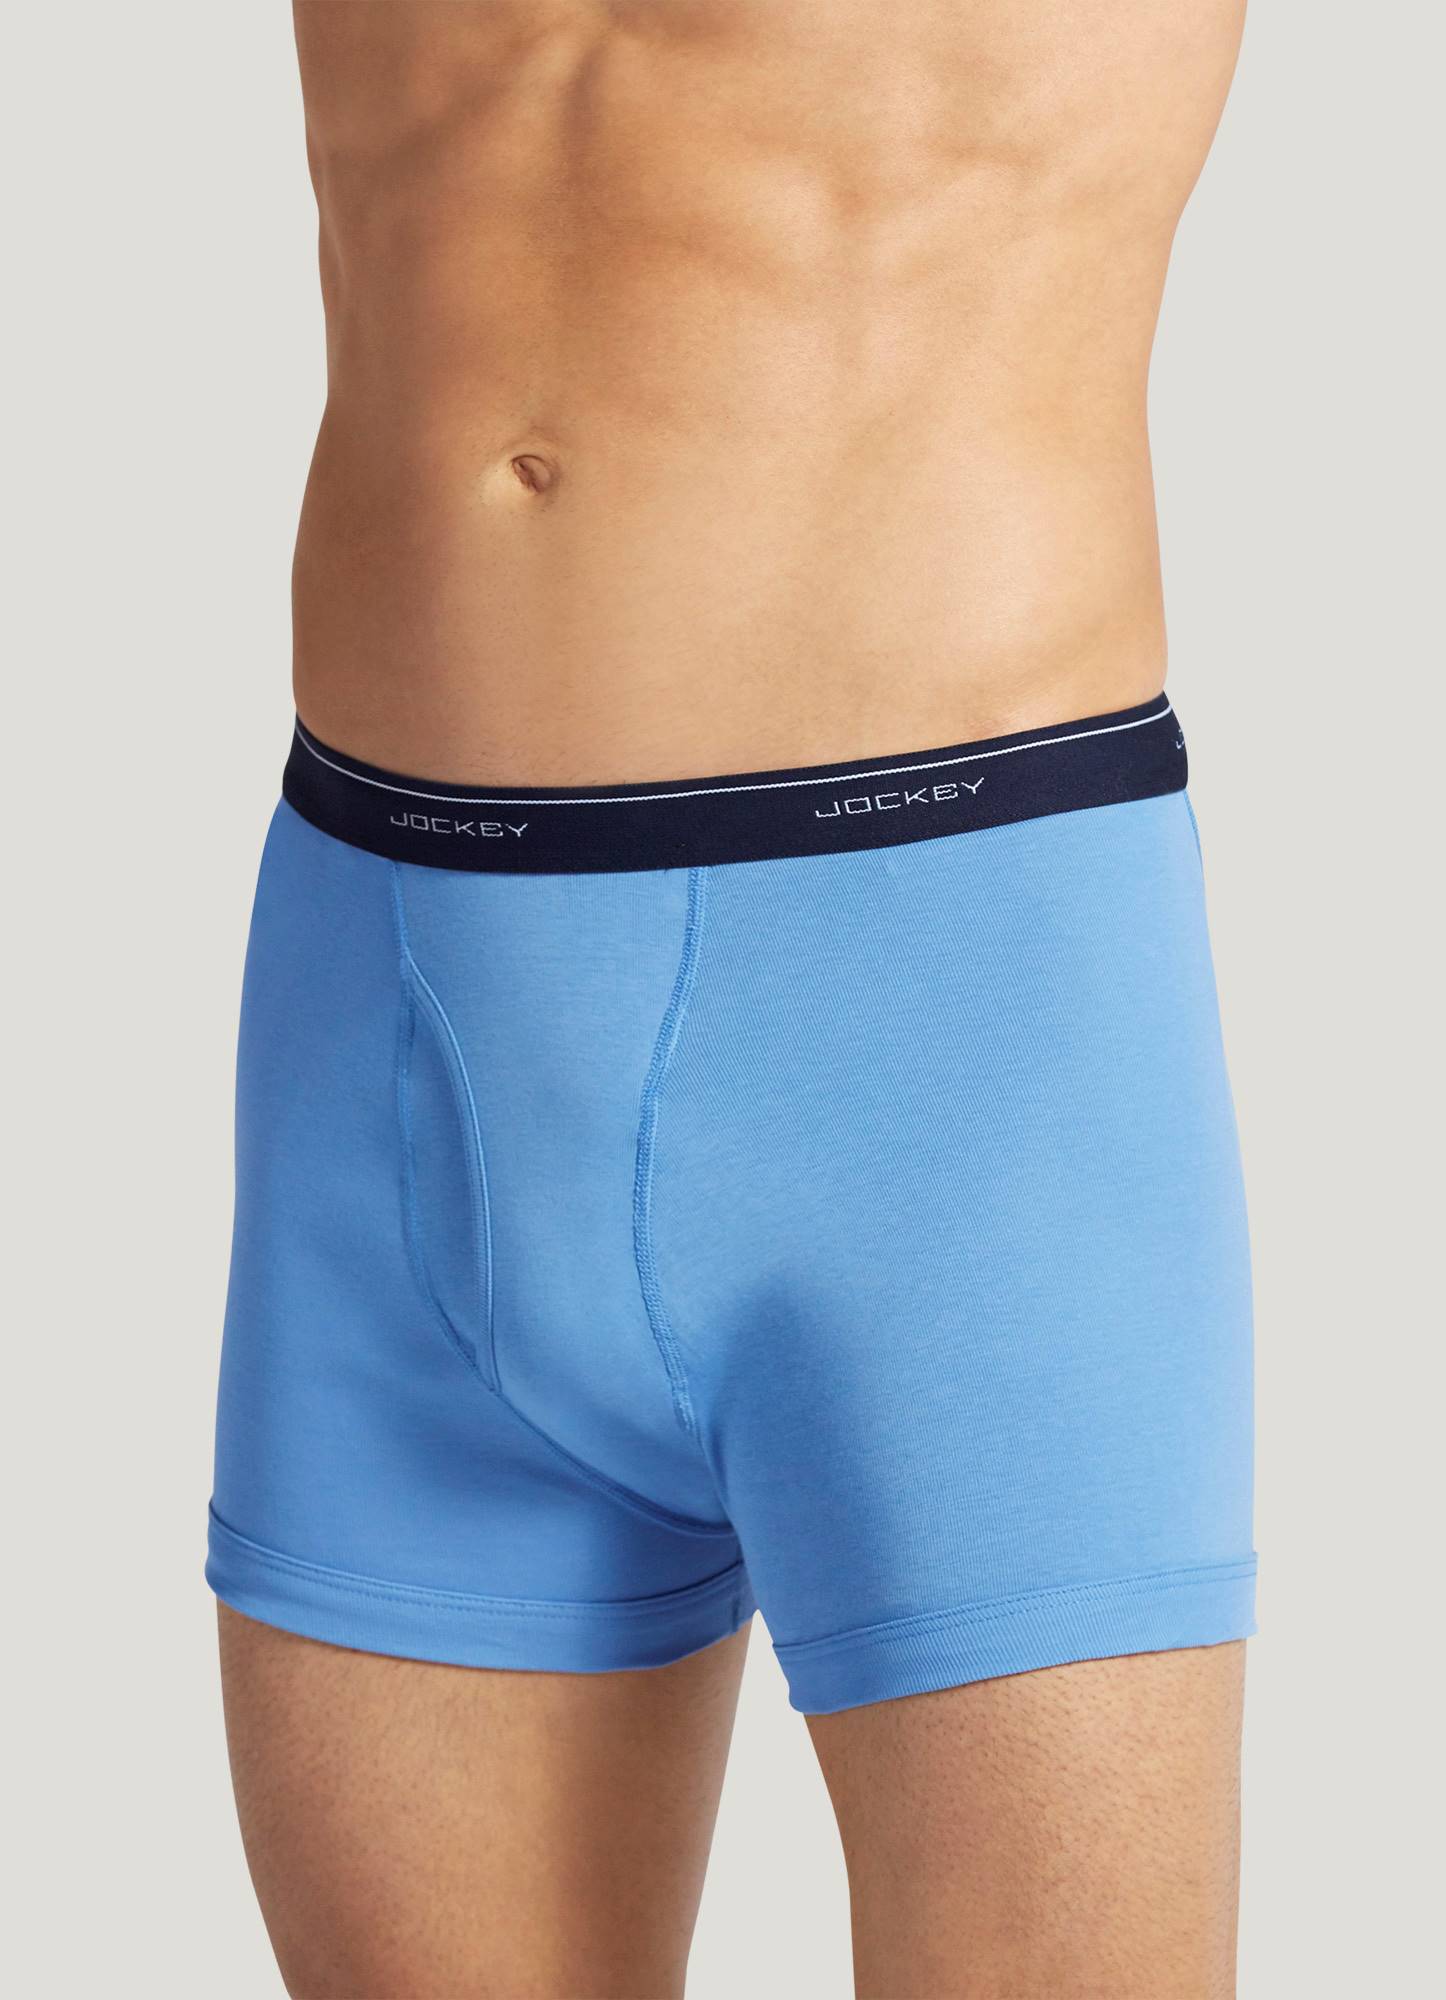 36 Pieces Yacht & Smith Mens 100% Cotton Boxer Brief Assorted Colors Size 3X  - Mens Underwear - at 